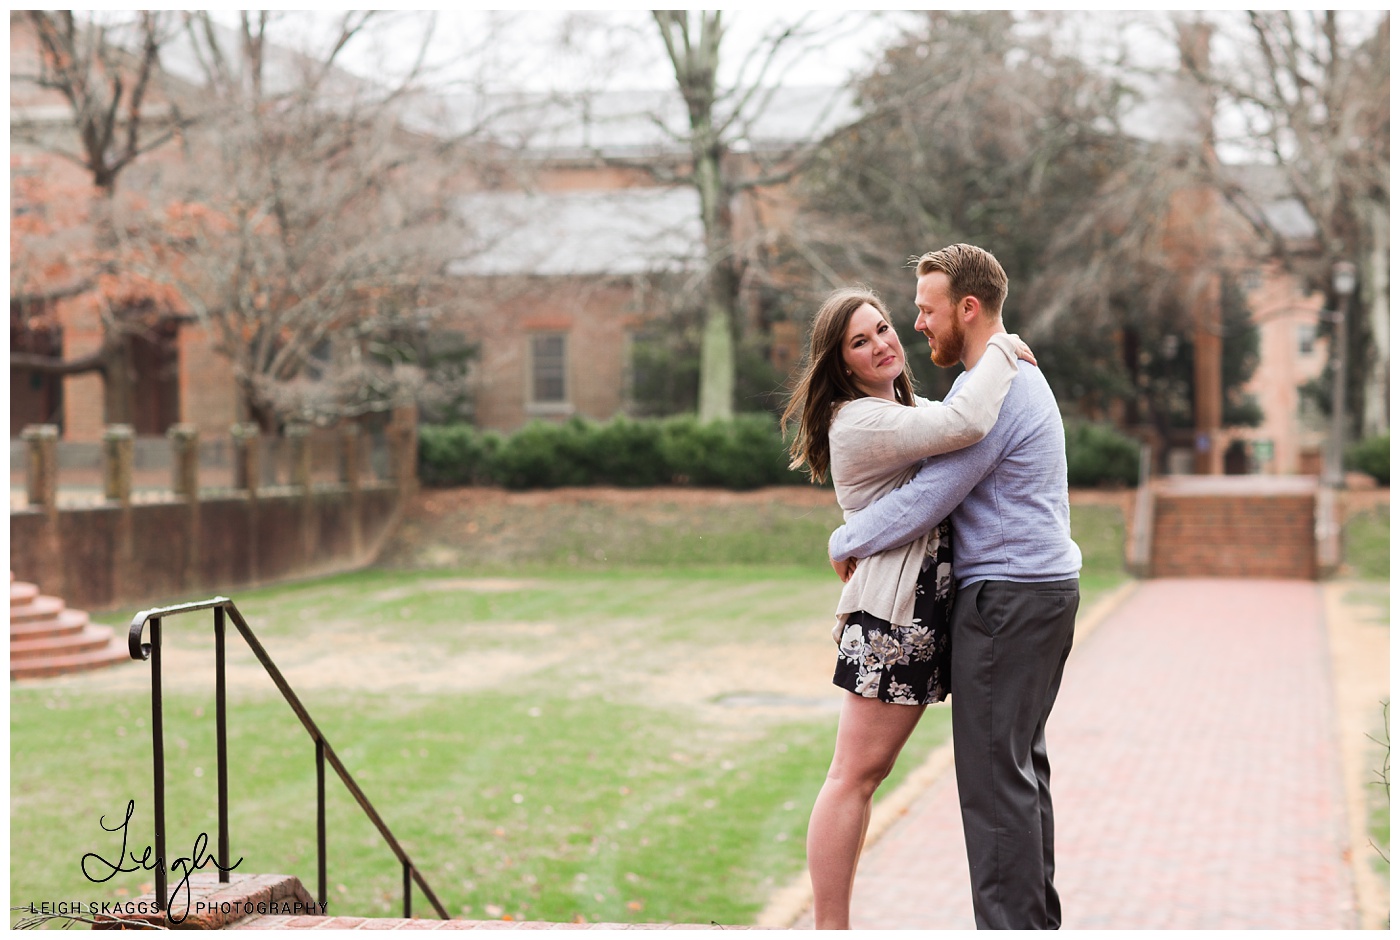 Colonial Williamsburg Winter Engagement session!